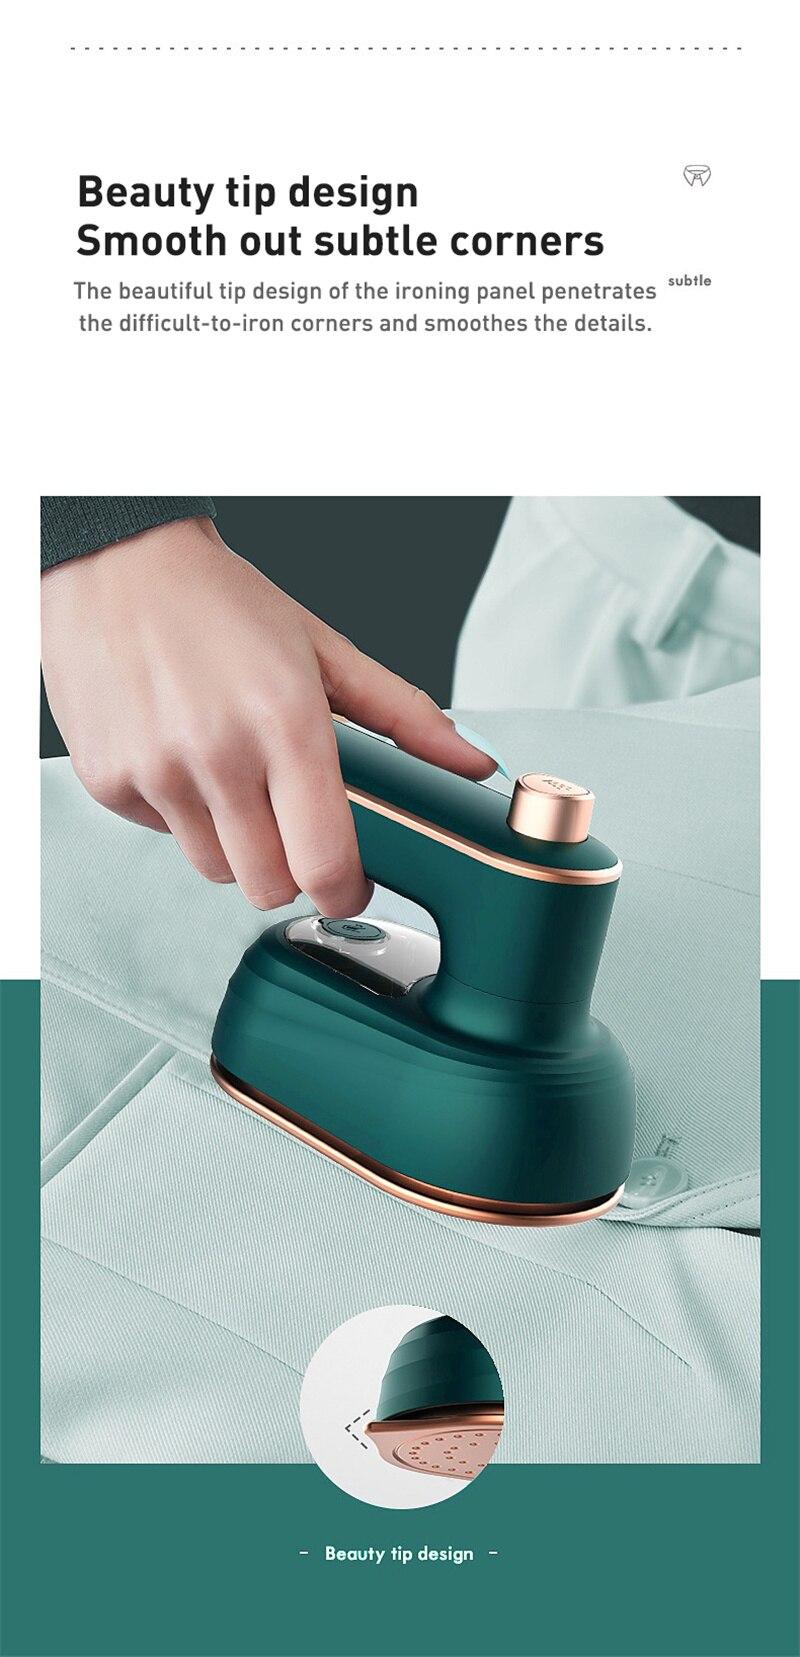 100V-240V Handheld Steam Iron Portable Electric Garment Steamer Clothes Hanging Ironing Rotatable Ceramic Plate Ironing Machine